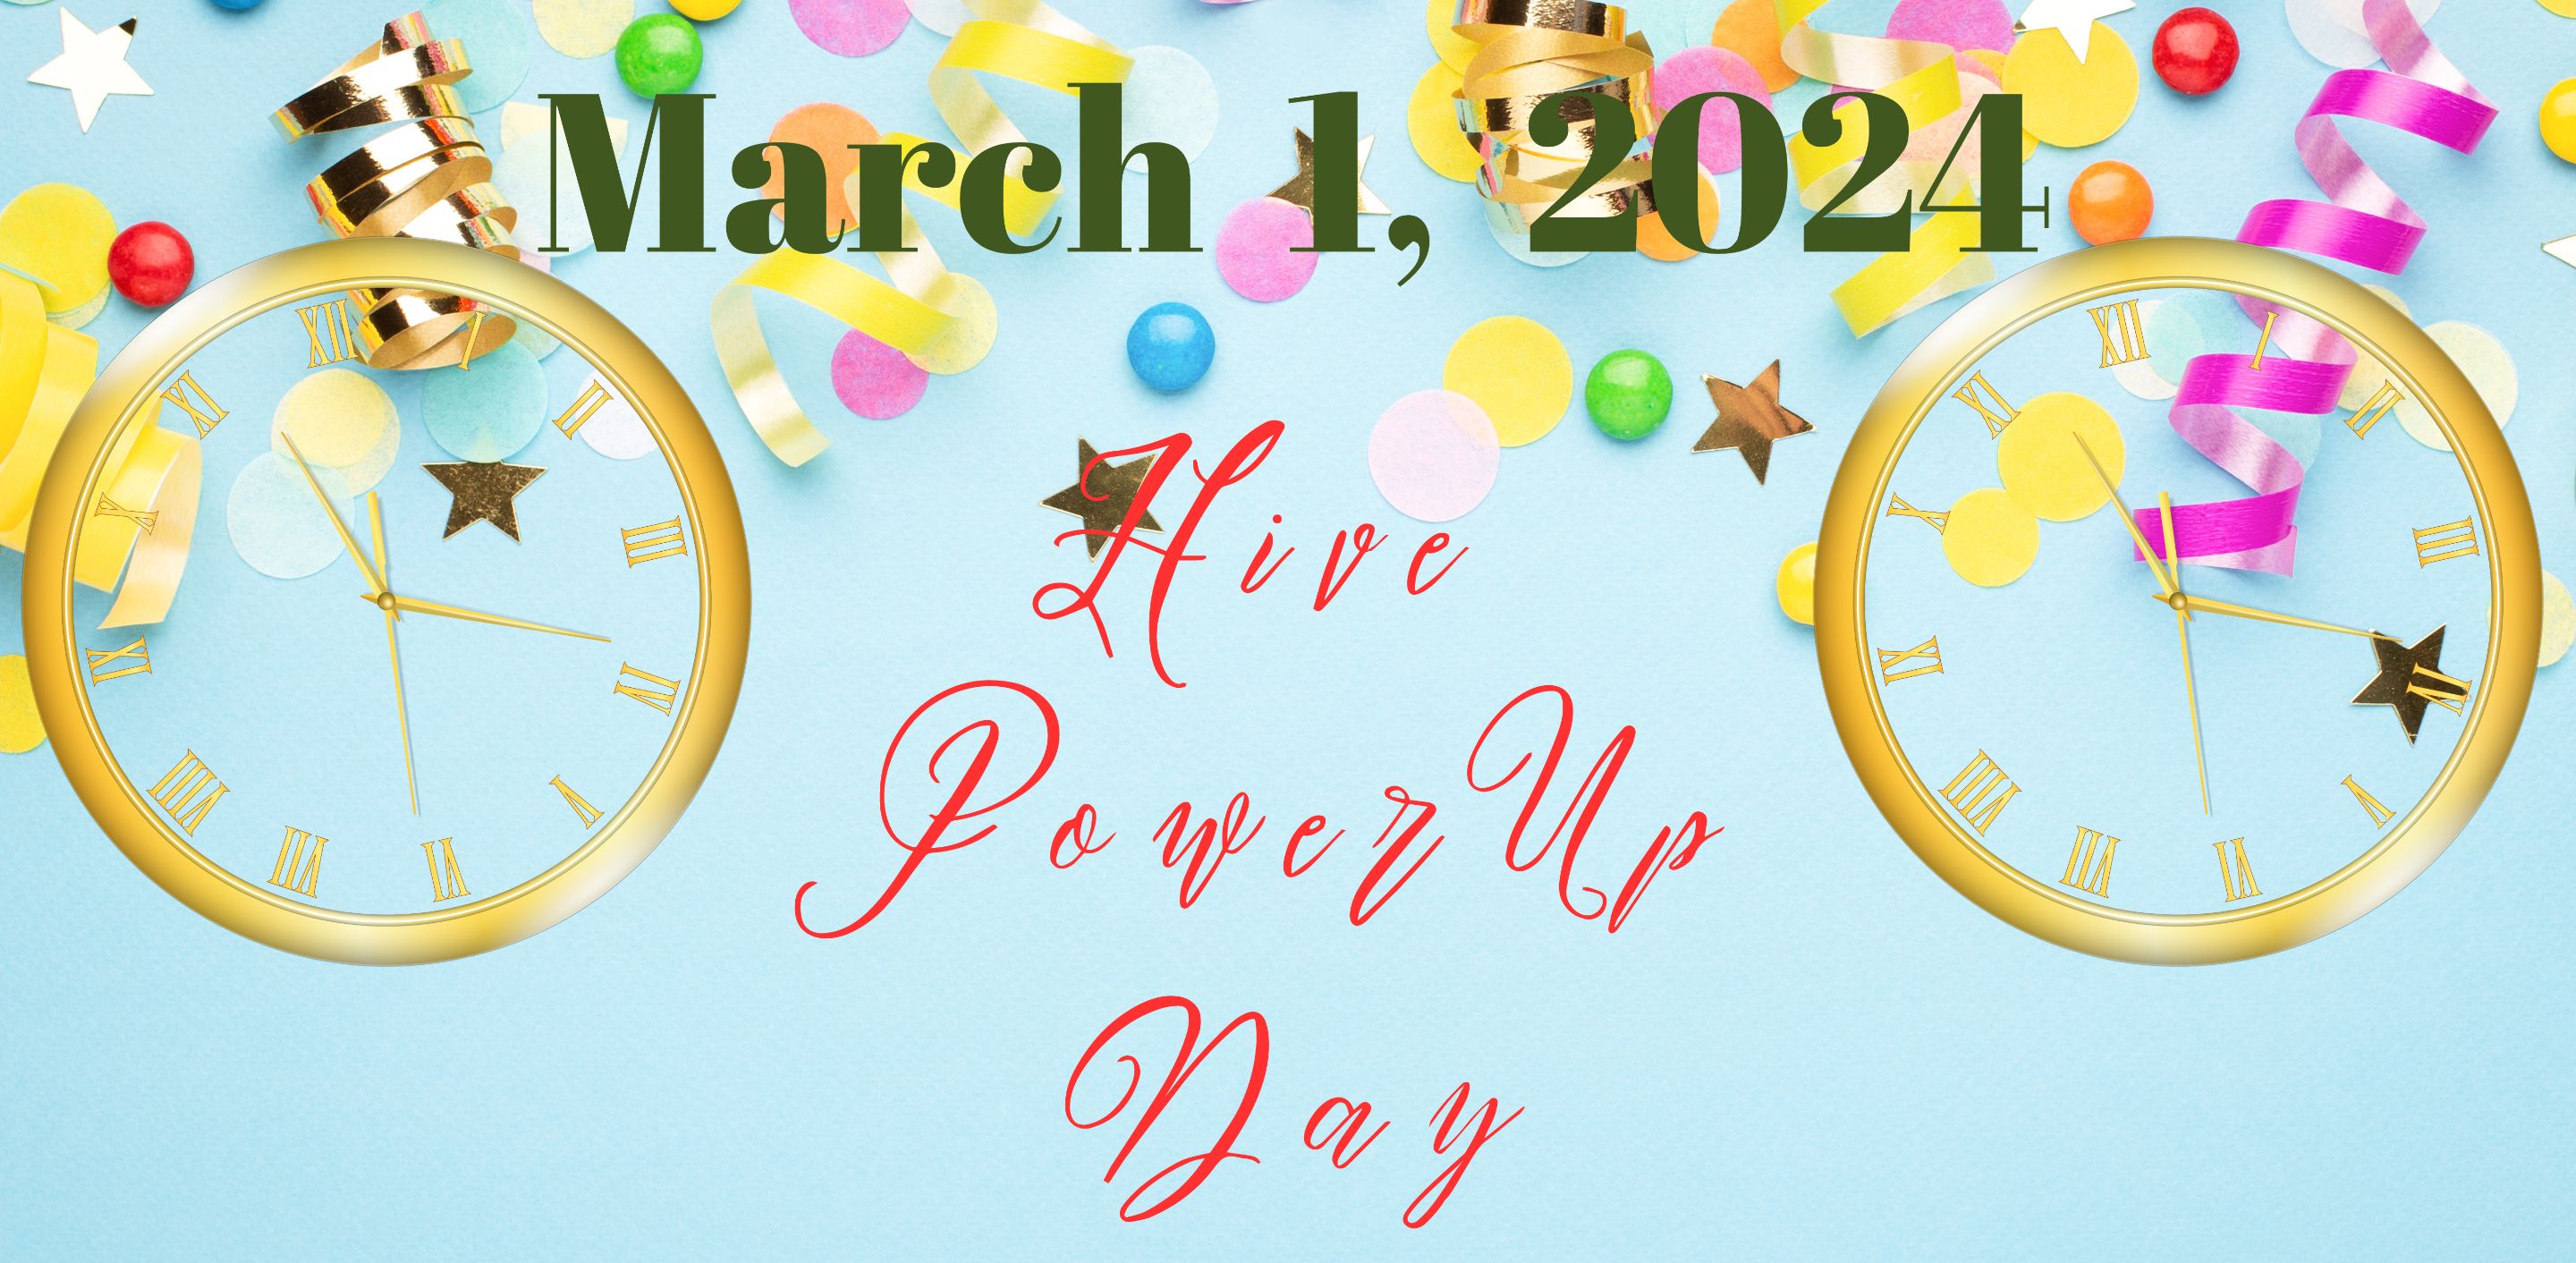 Power Up Day April 2024crp.png